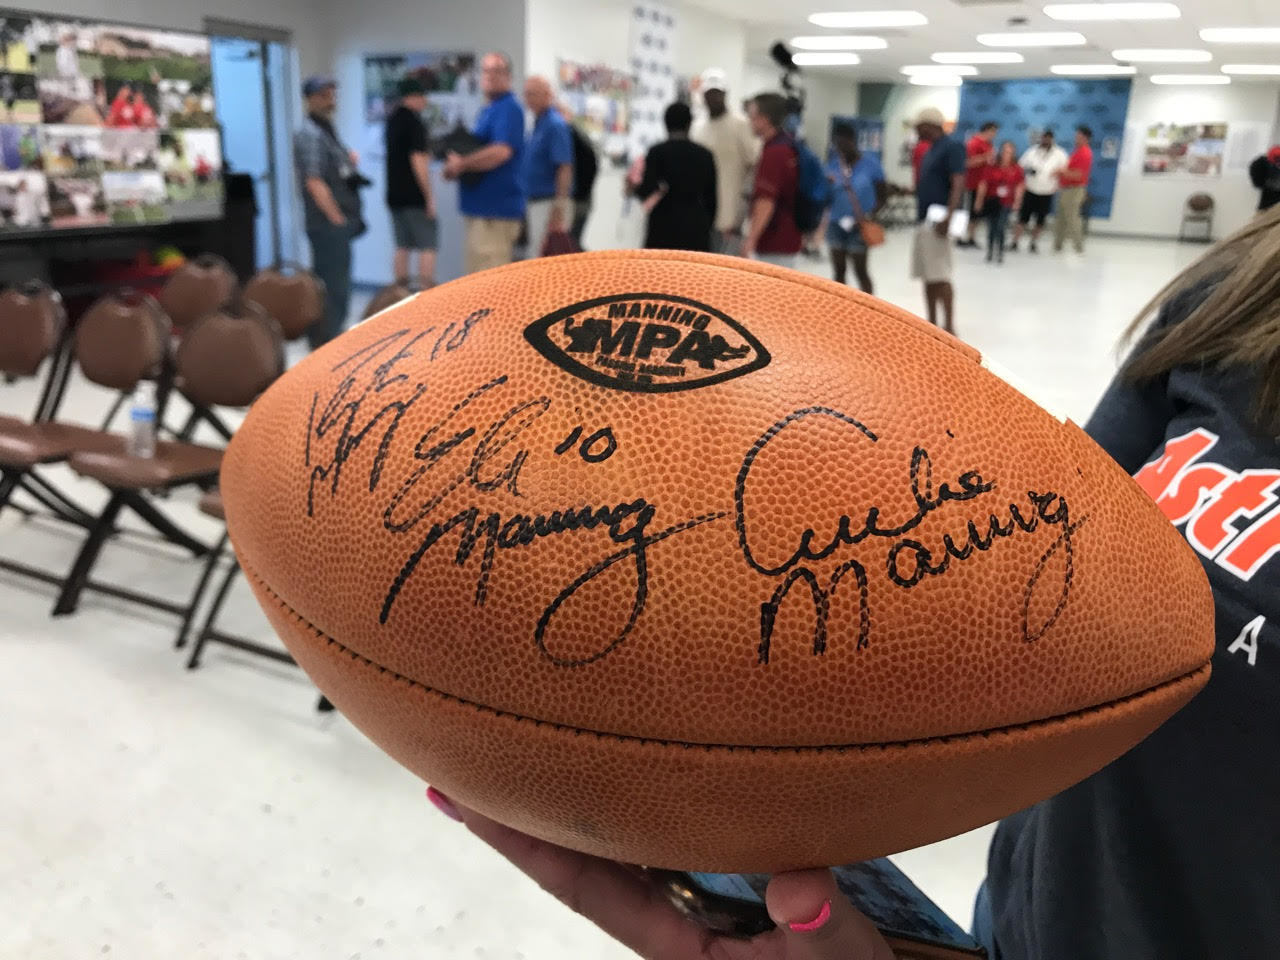 William's autographed football. Photo courtesy of Julie Klick.